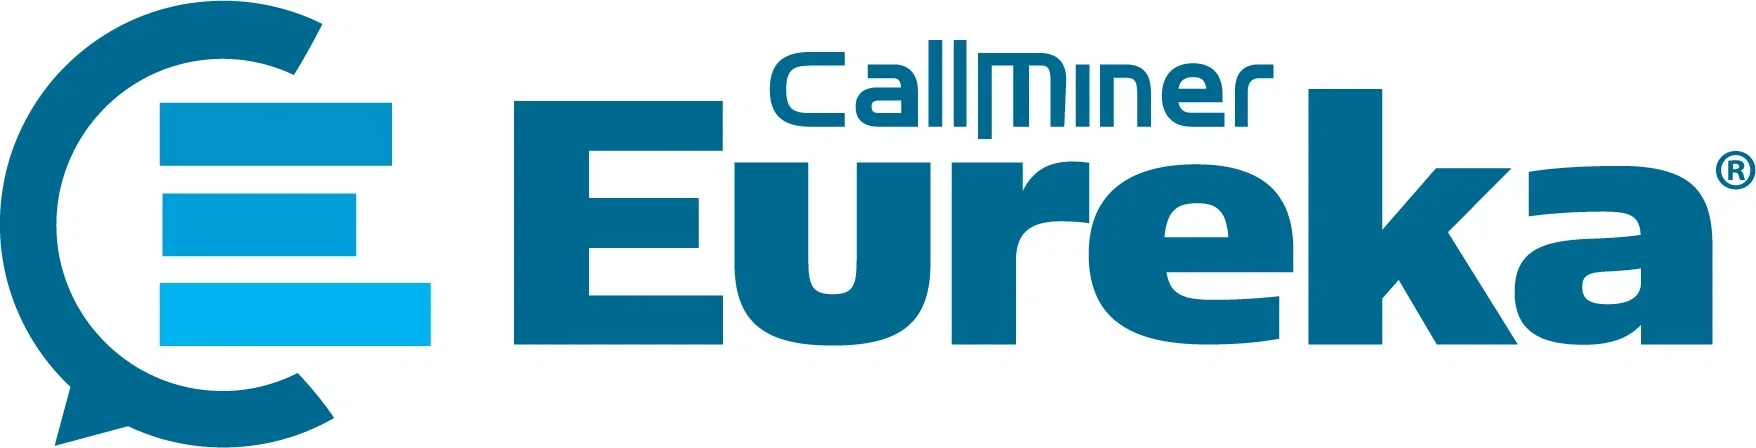 Callminer Promo Codes & Coupons